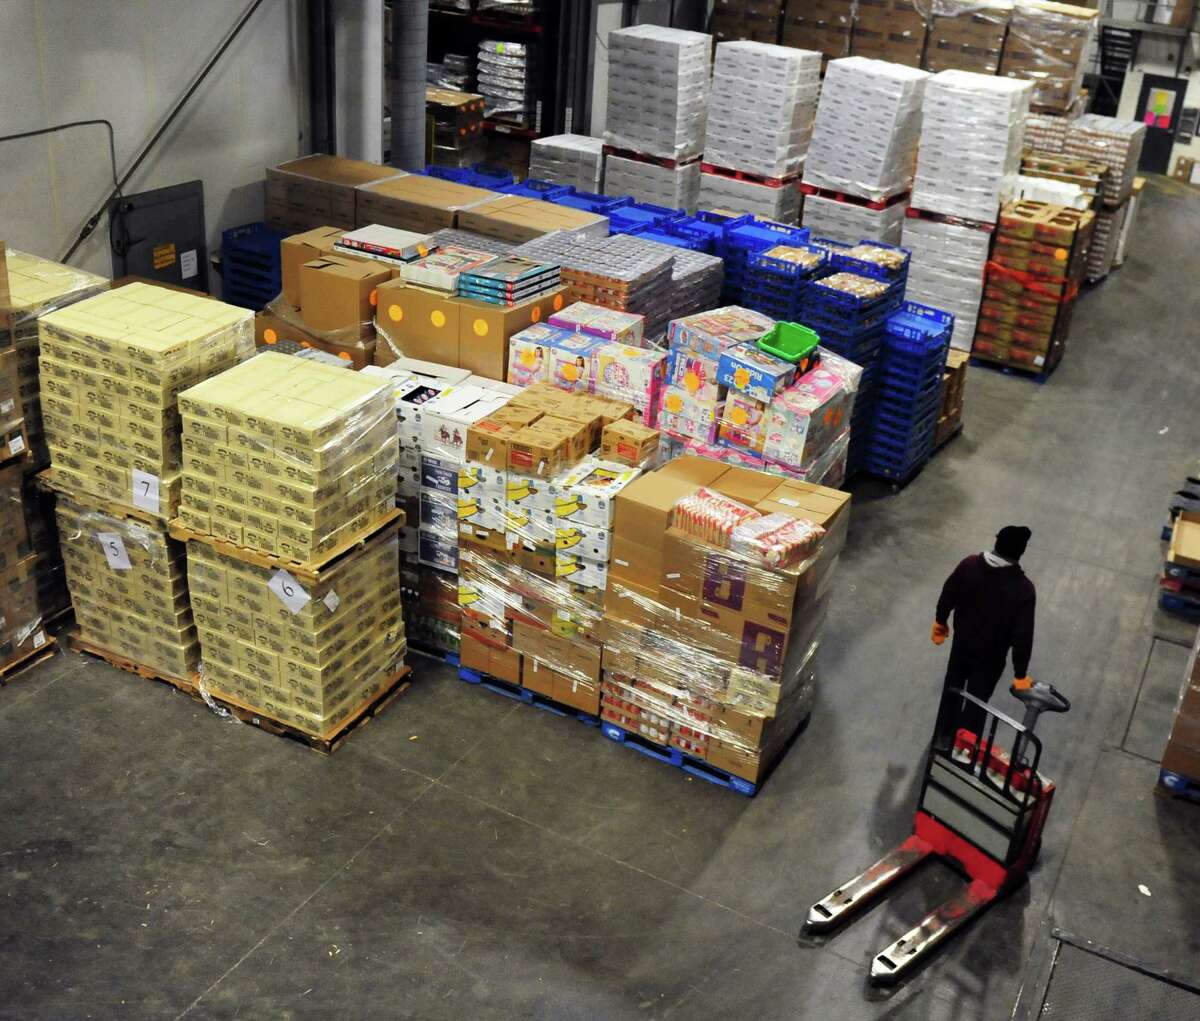 One part of the Regional Food Bank warehouse in Colonie, N.Y., from which thousands of pounds of fresh and non-perishable food is distributed to 23 New York counties each day. (Robert Downen/Times Union)